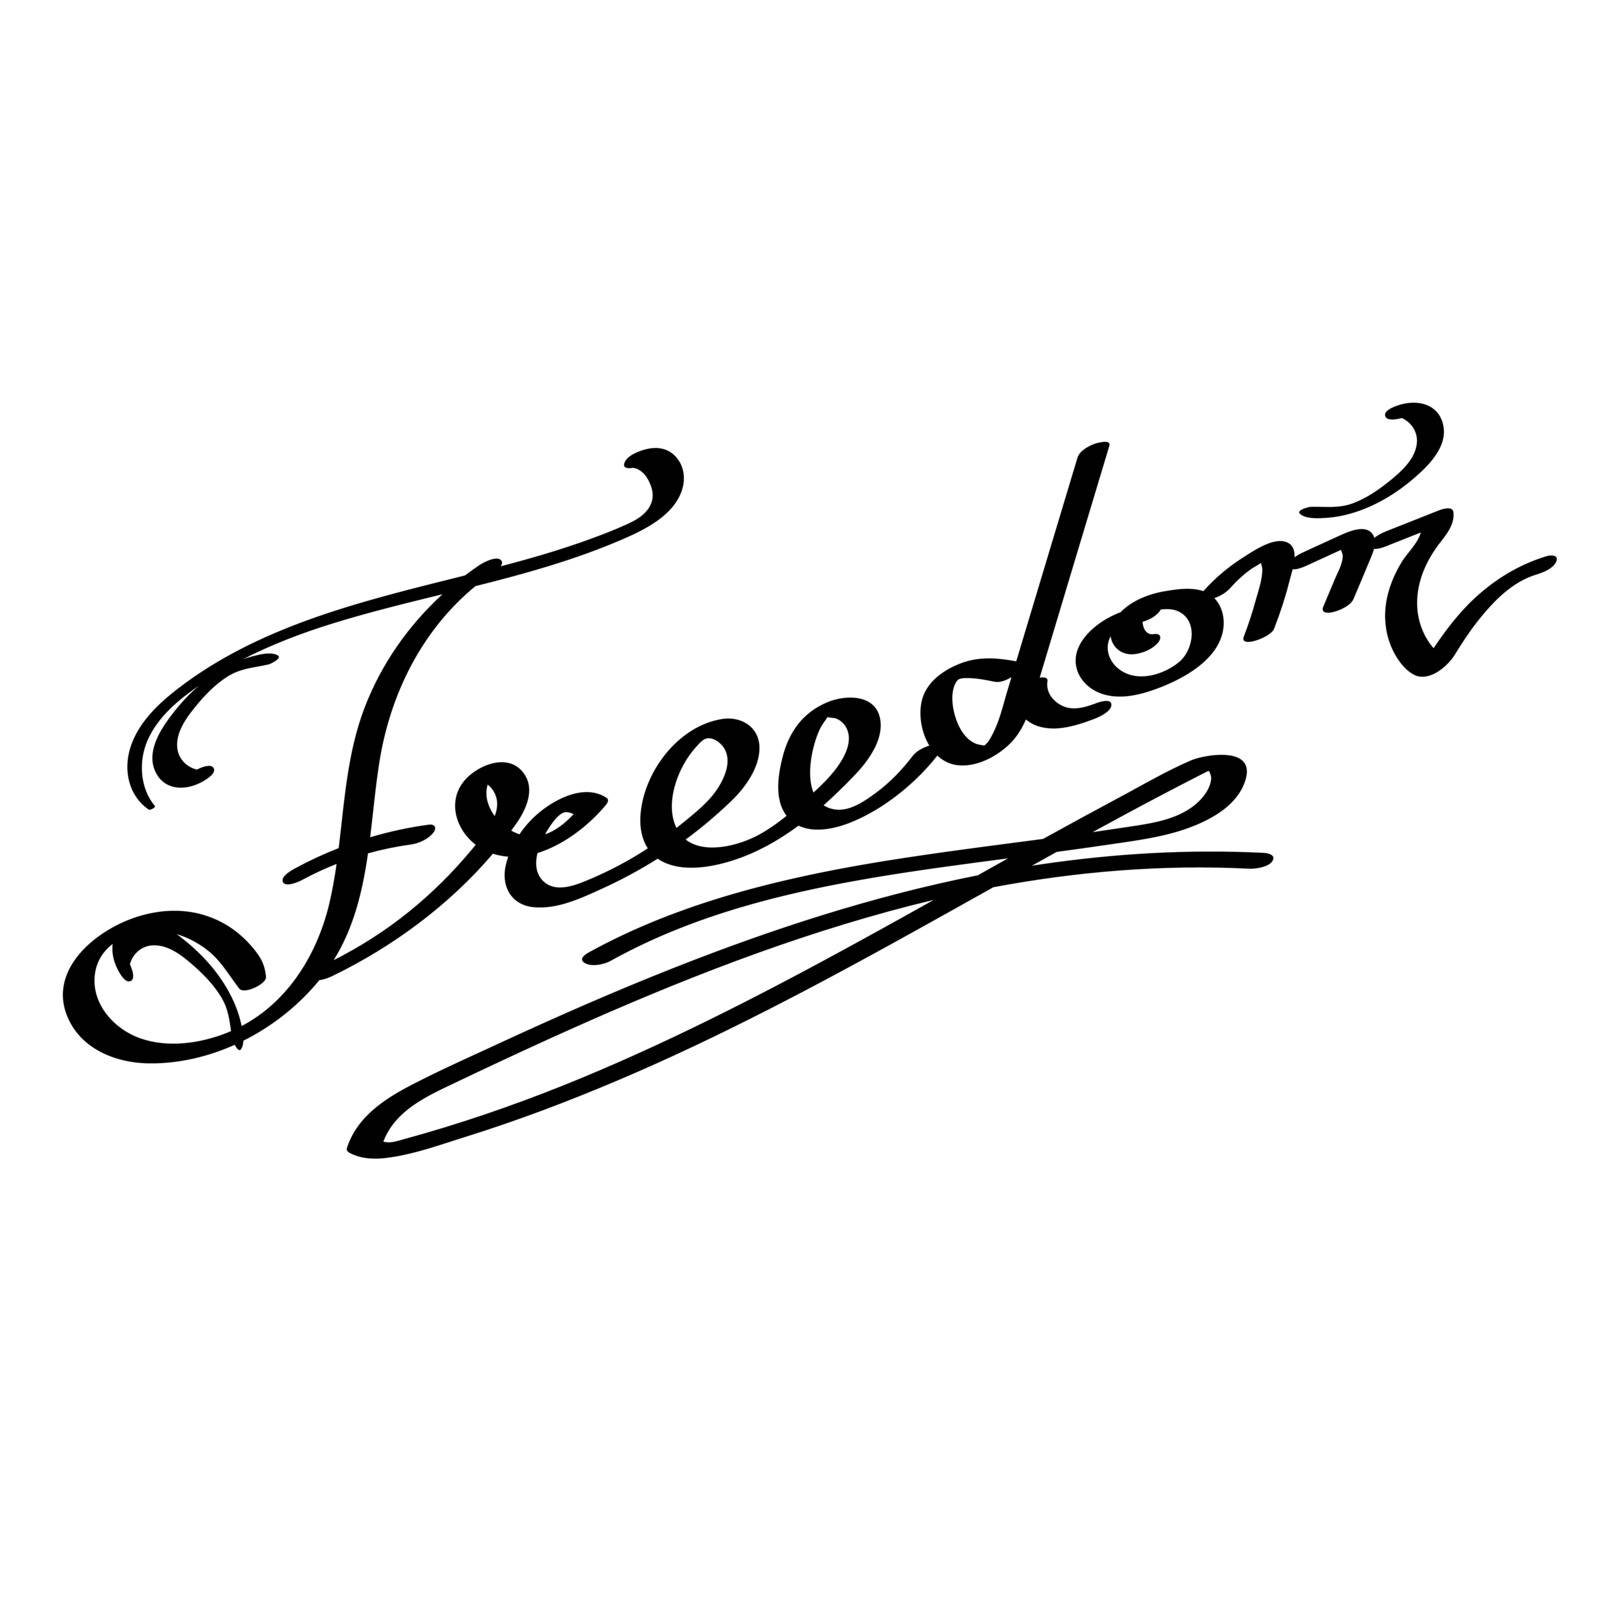 Lettering Freedom Text. Hand Sketched Typography Sign for Badge, Icon, Banner, Tag, Illustration. by valeo5